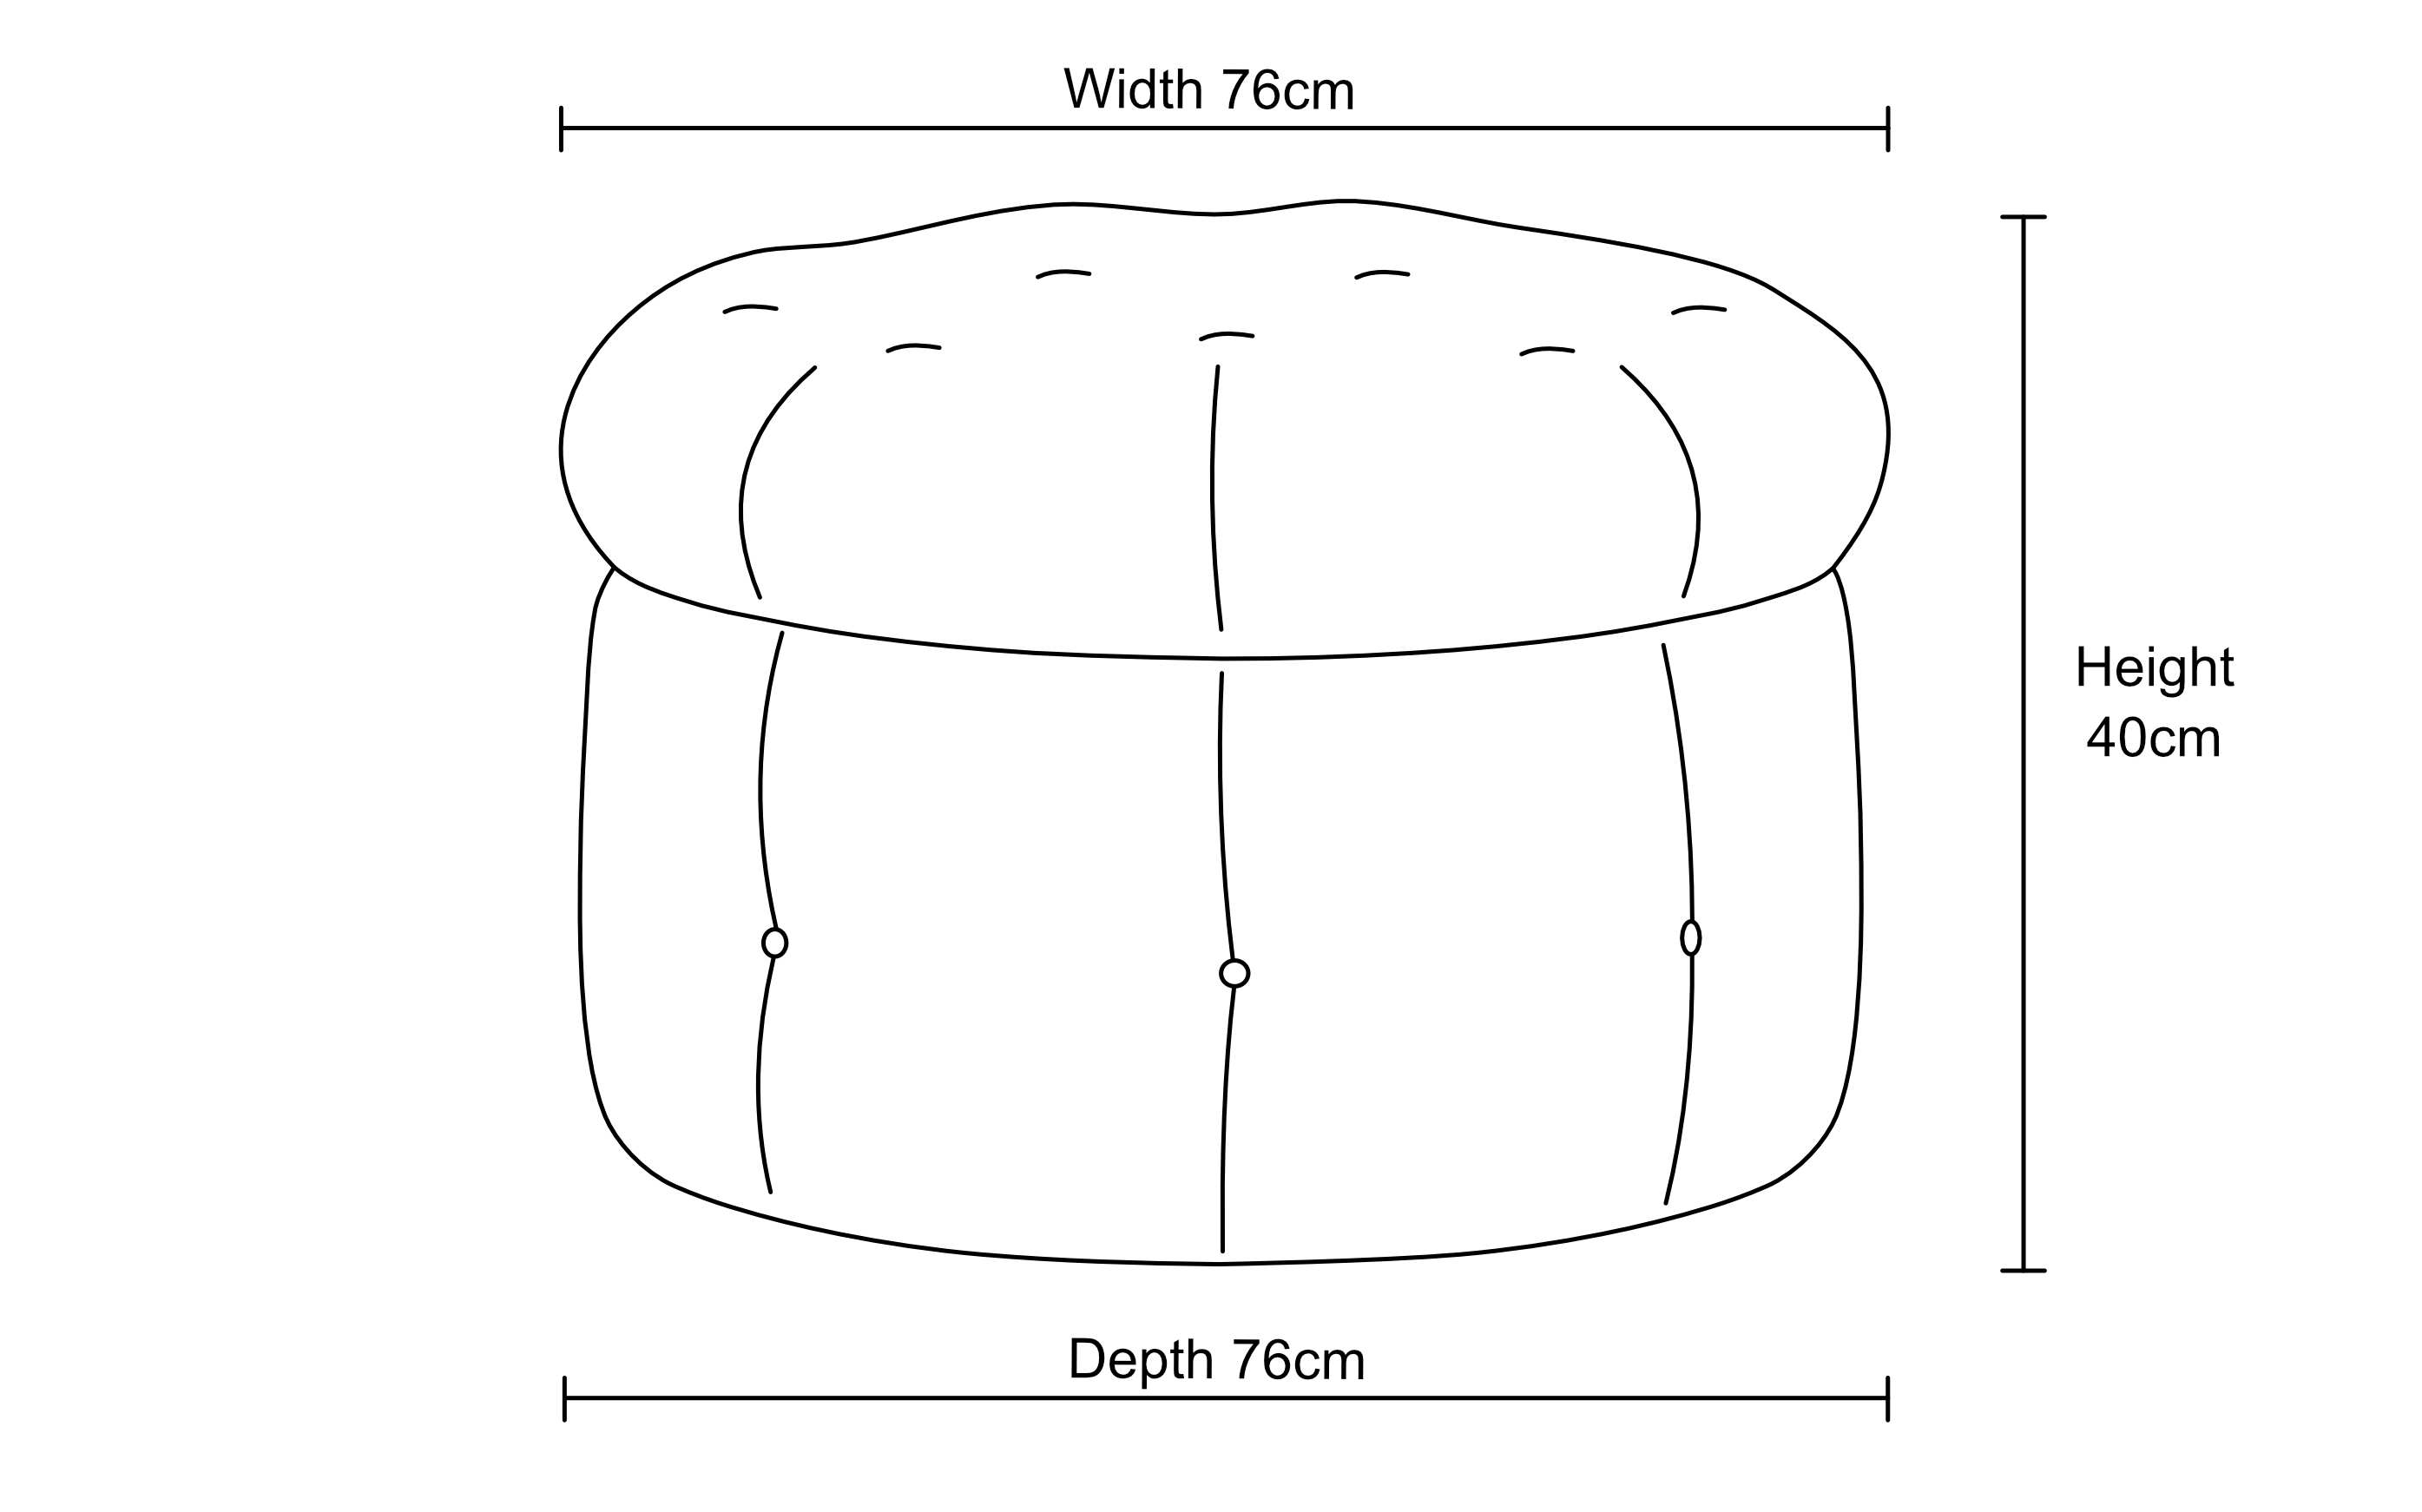 https://www.footstools.co.uk/wp-content/uploads/round-footstool-30x30-dimensions-5.jpg